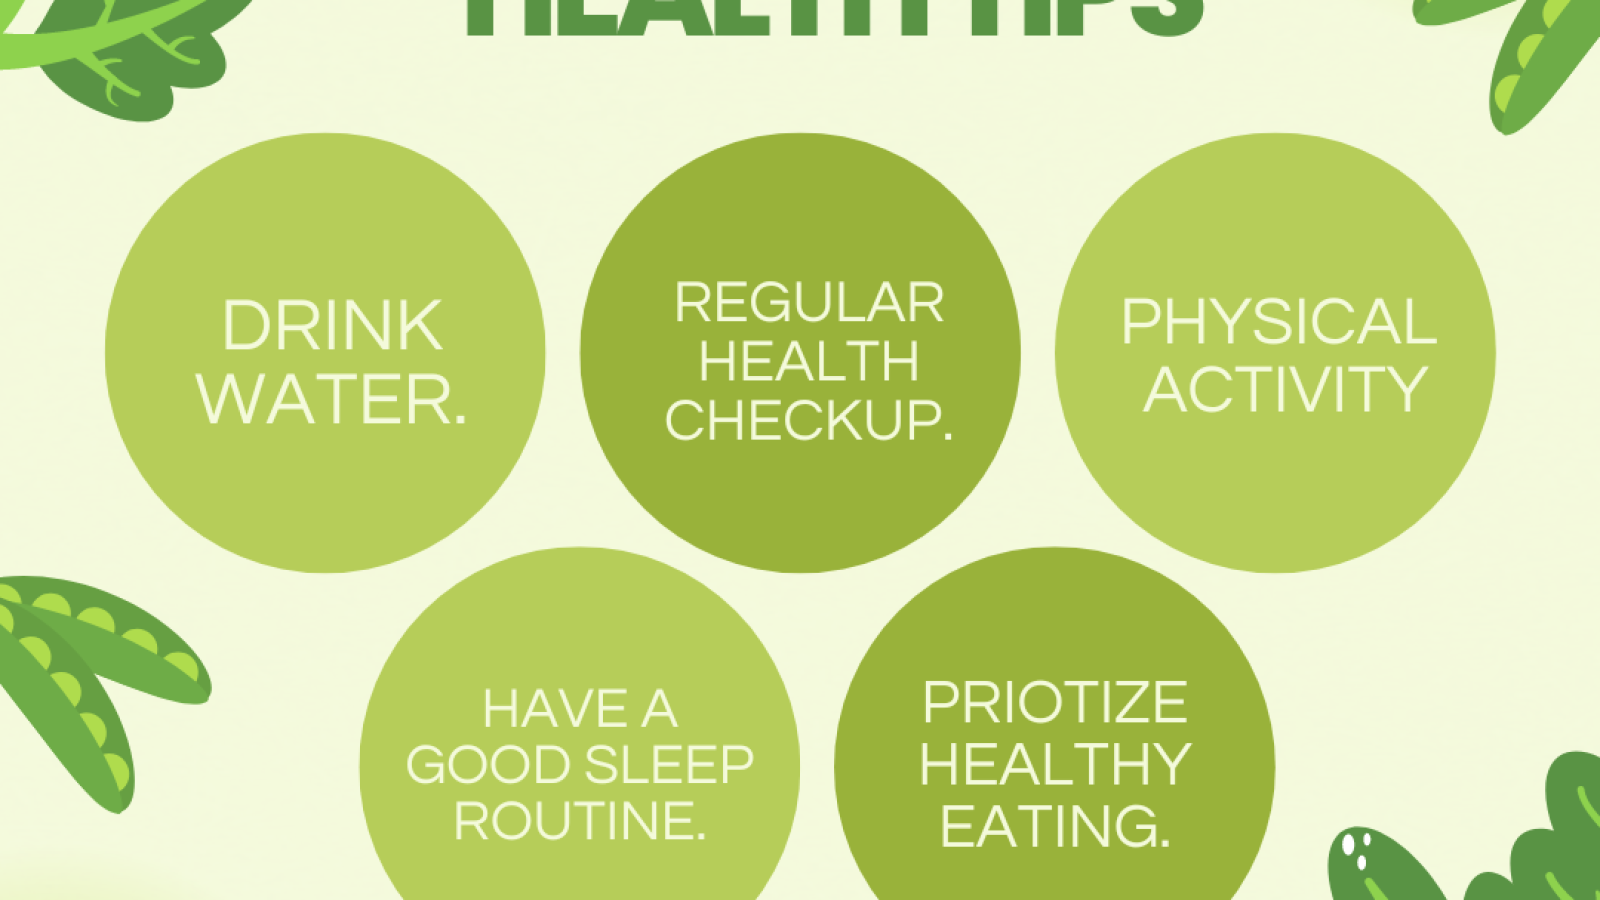 5 Easy tips to keep the body healthy